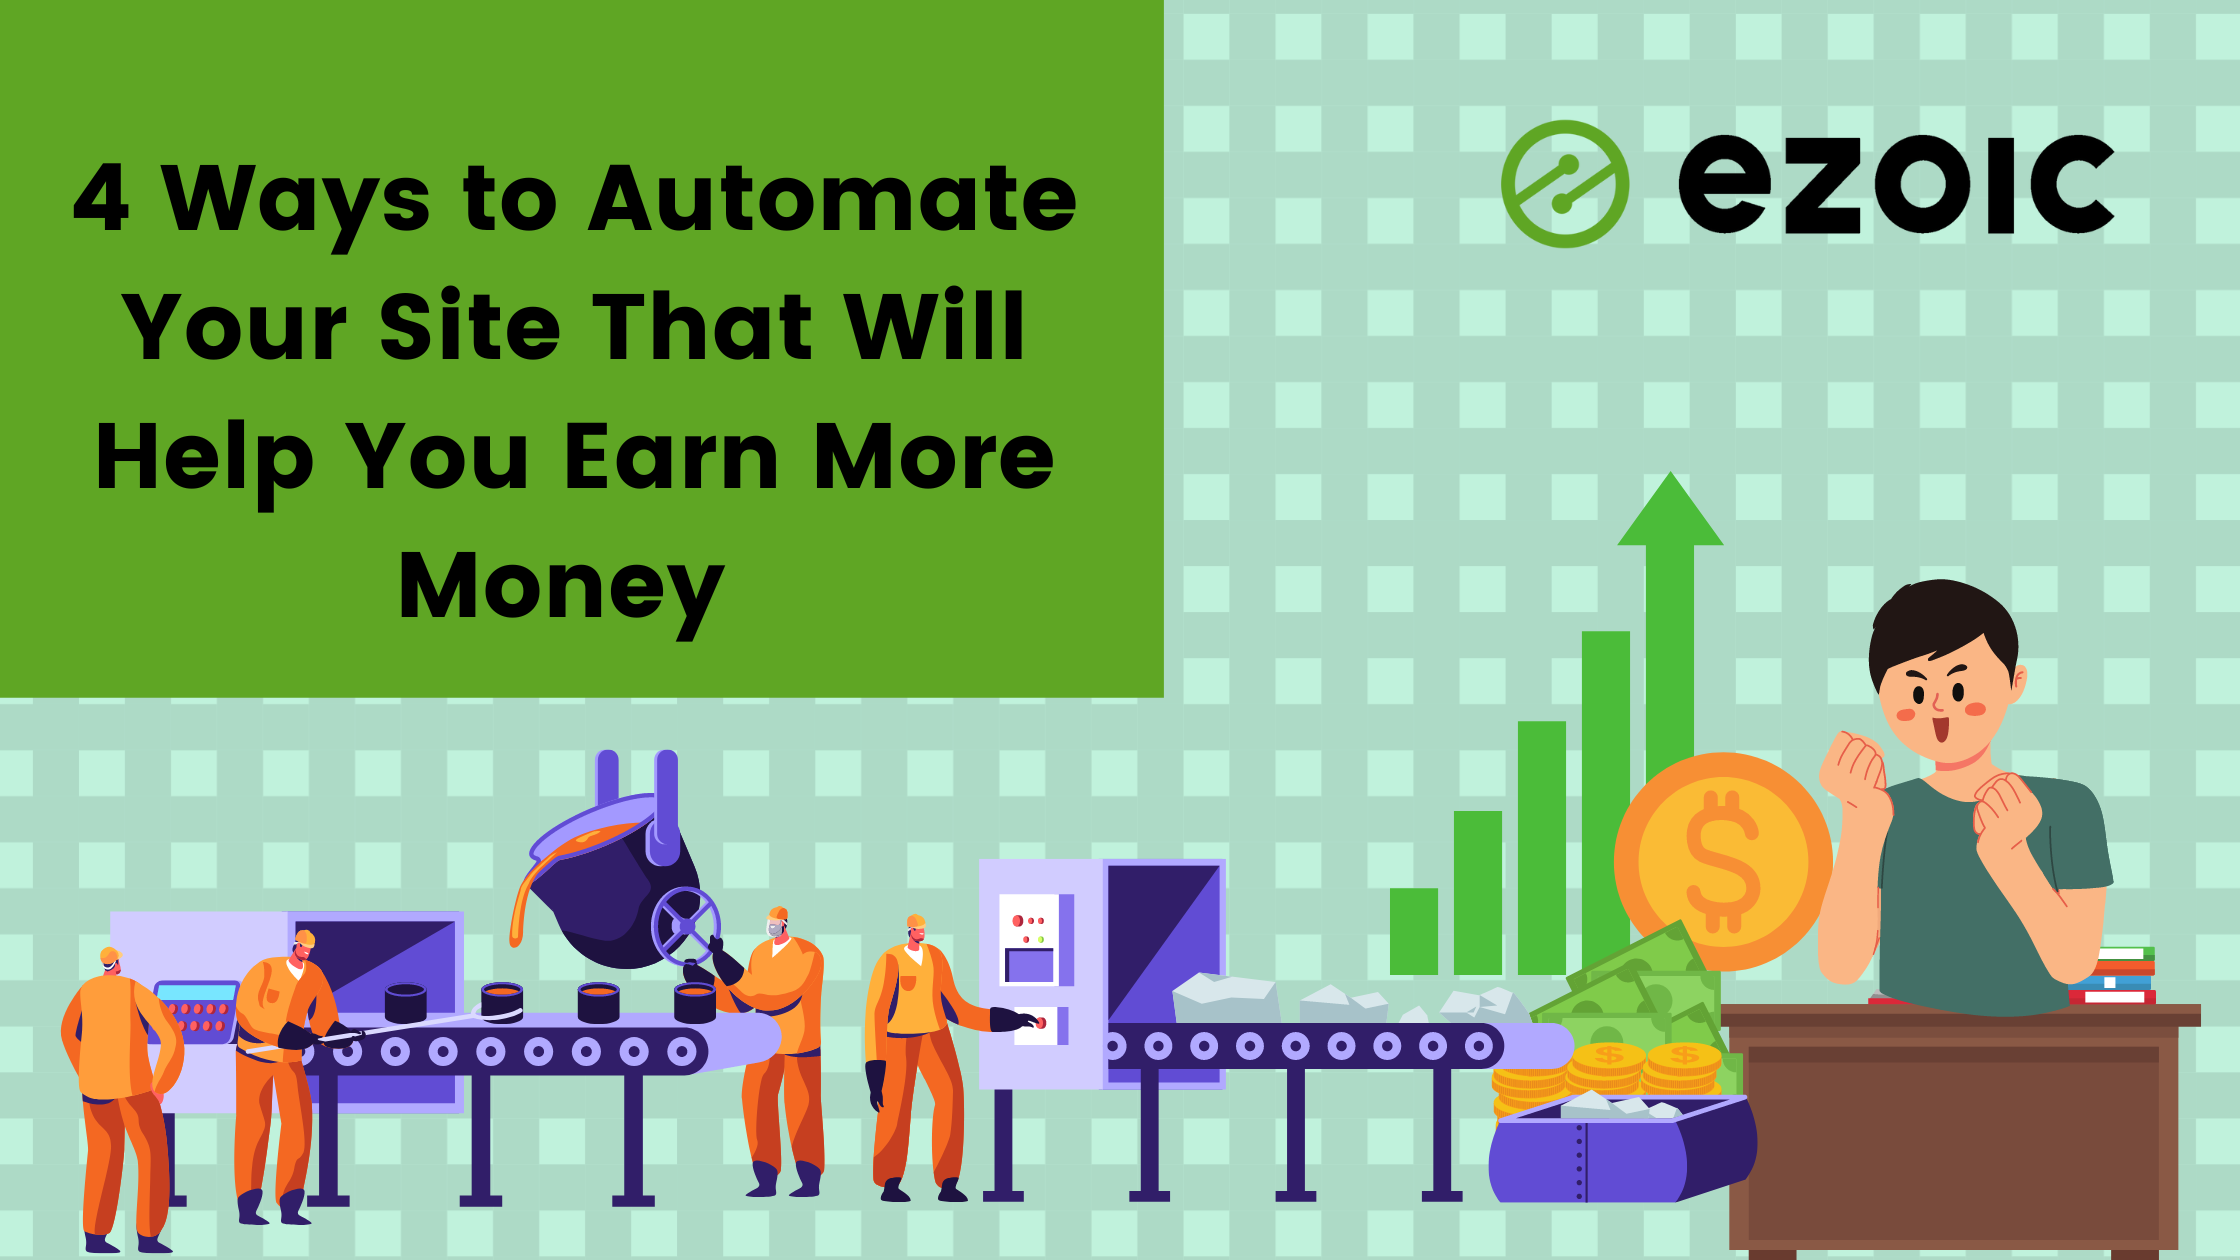 4 Ways to Automate Your Site That Will Help You Earn More Money 